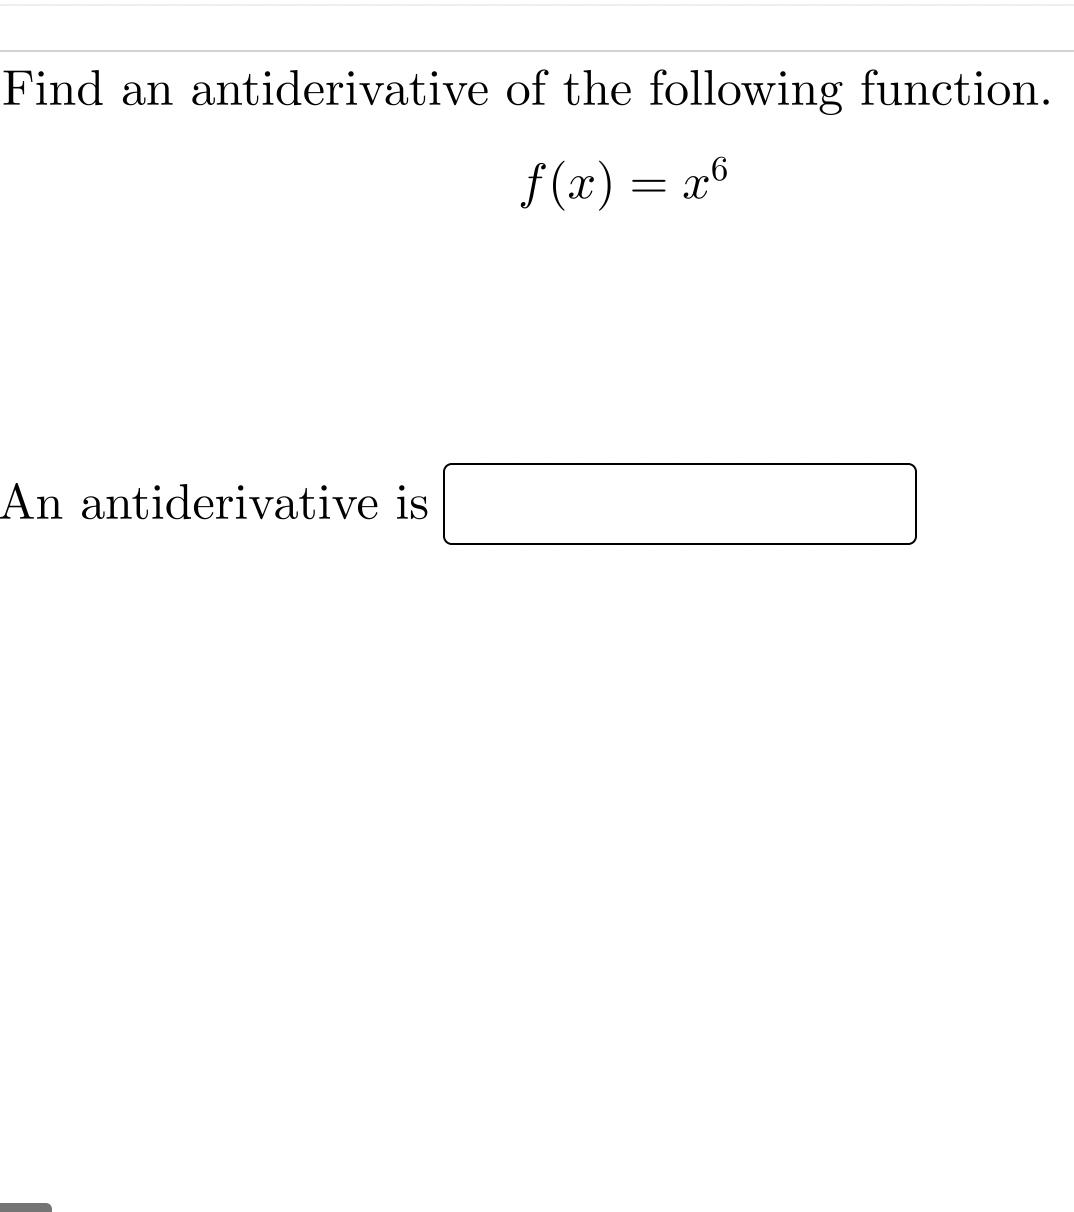 Find an antiderivative of the following function.
f(x) = x6
An antiderivative is